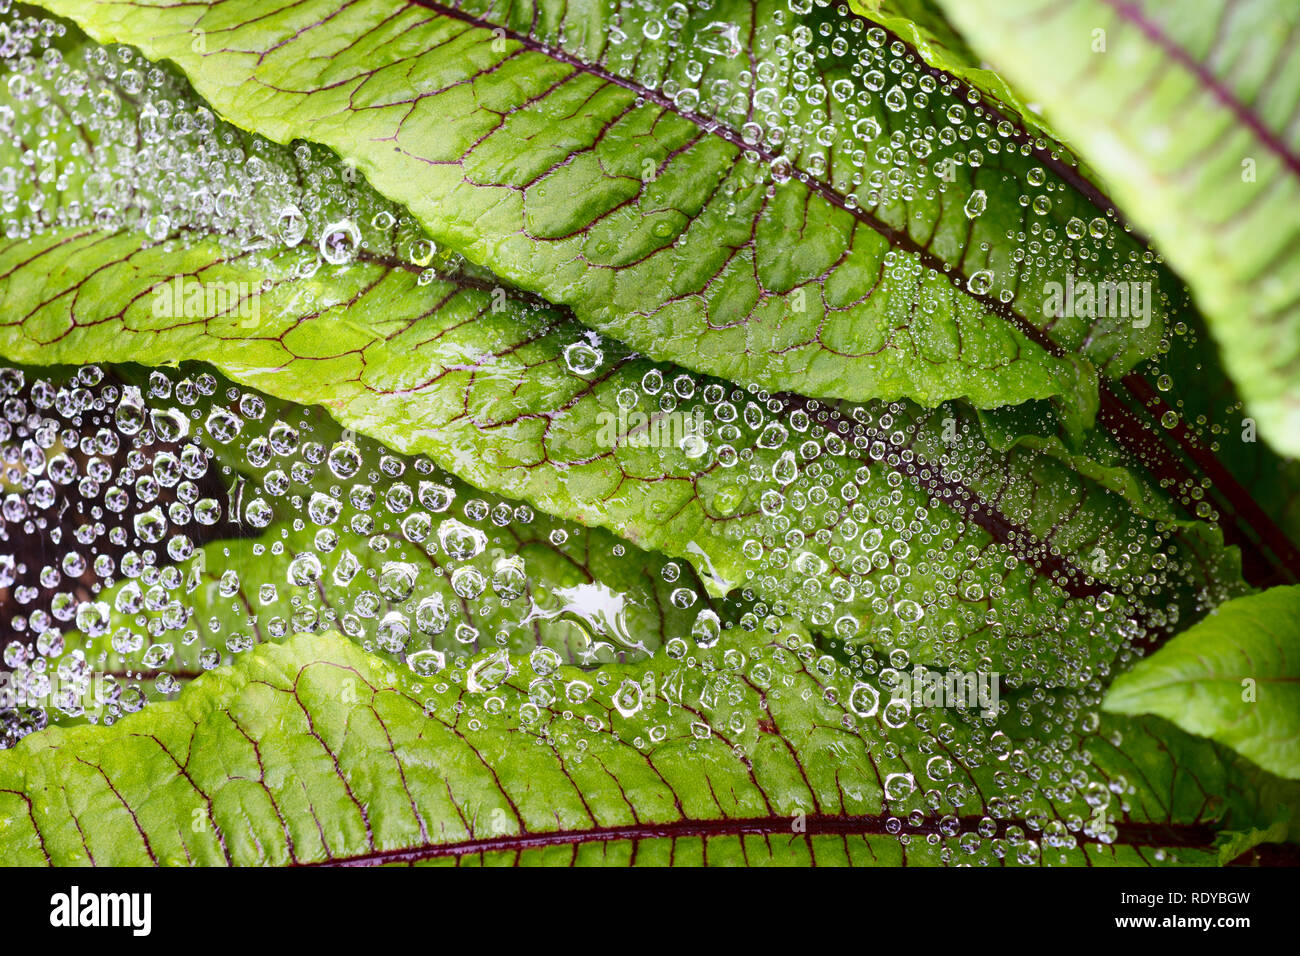 Leaves of a leafy green vegetable Blood Sorrel (Rumex sanguineus) in the morning, with spiderweb and dew drops Stock Photo